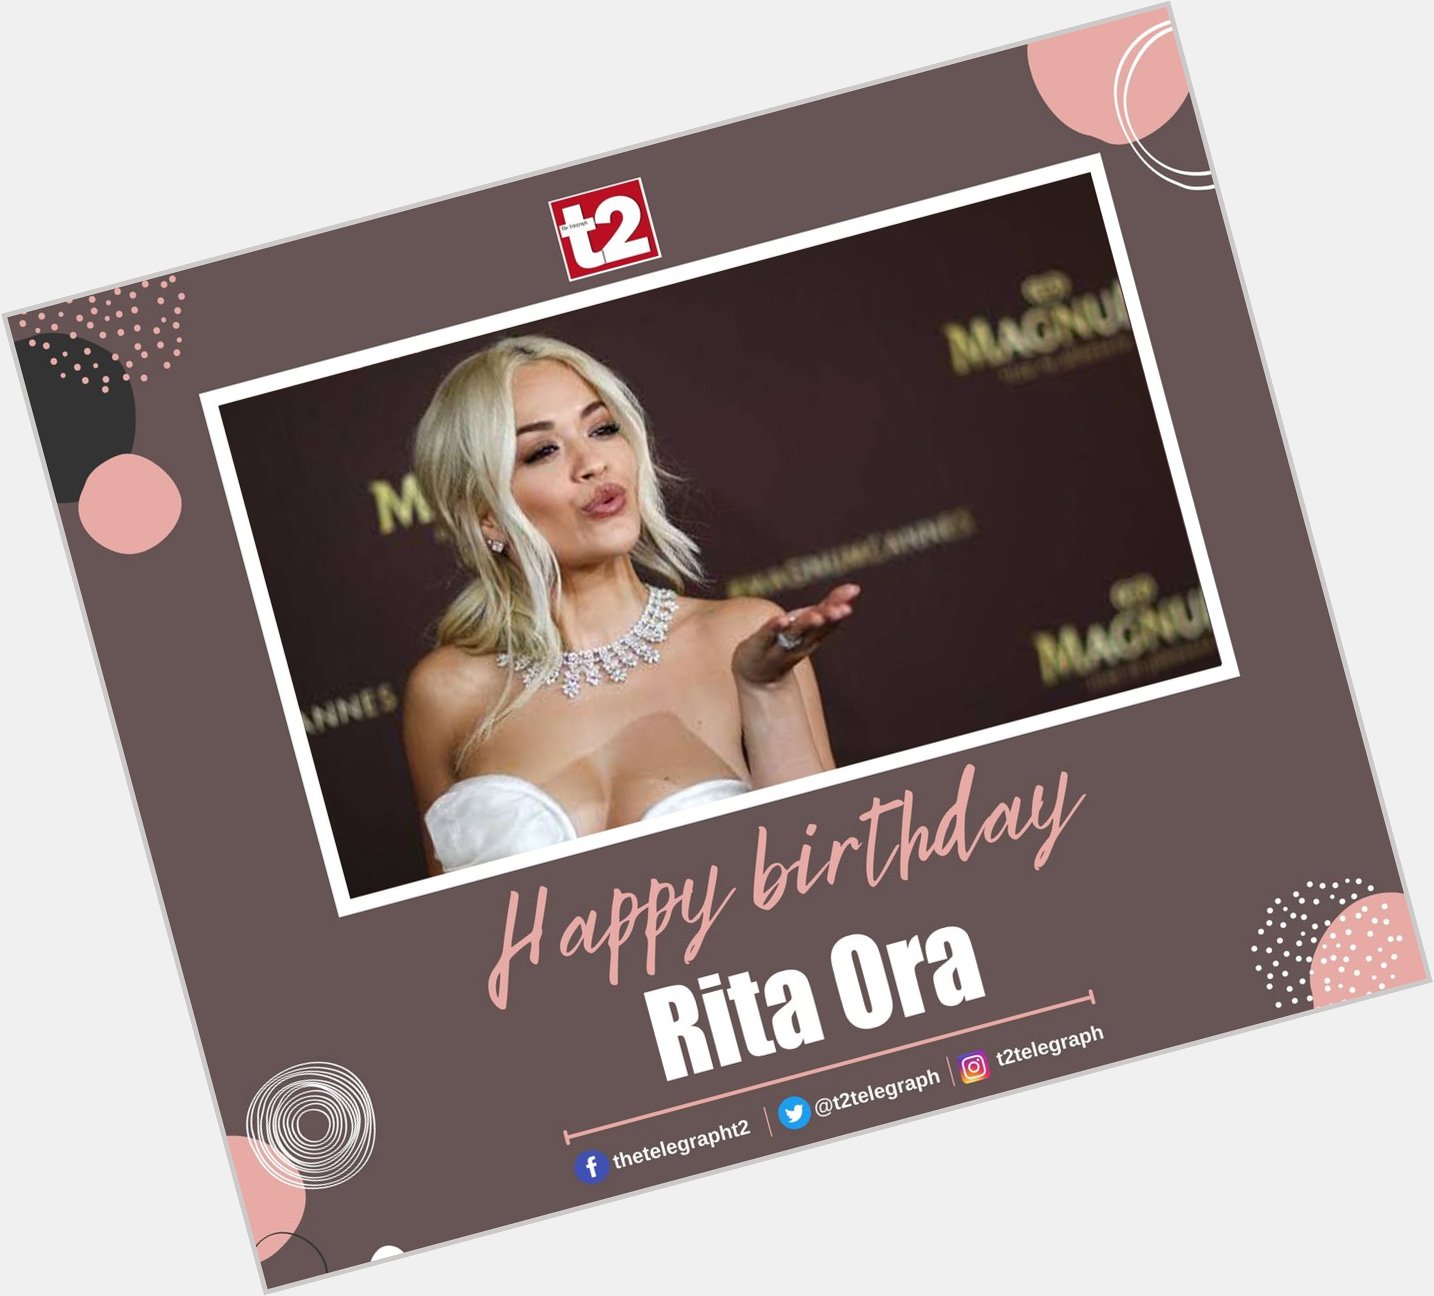 Happy birthday to the singer with high-octane vibes. Let\s raise a toast for Rita Ora 